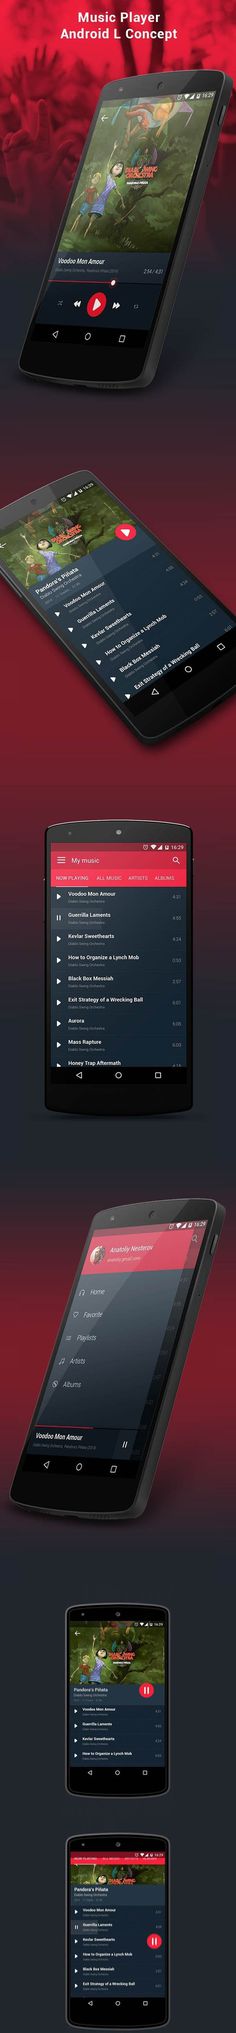 Android L Player Concept by Anatoly Nesterov